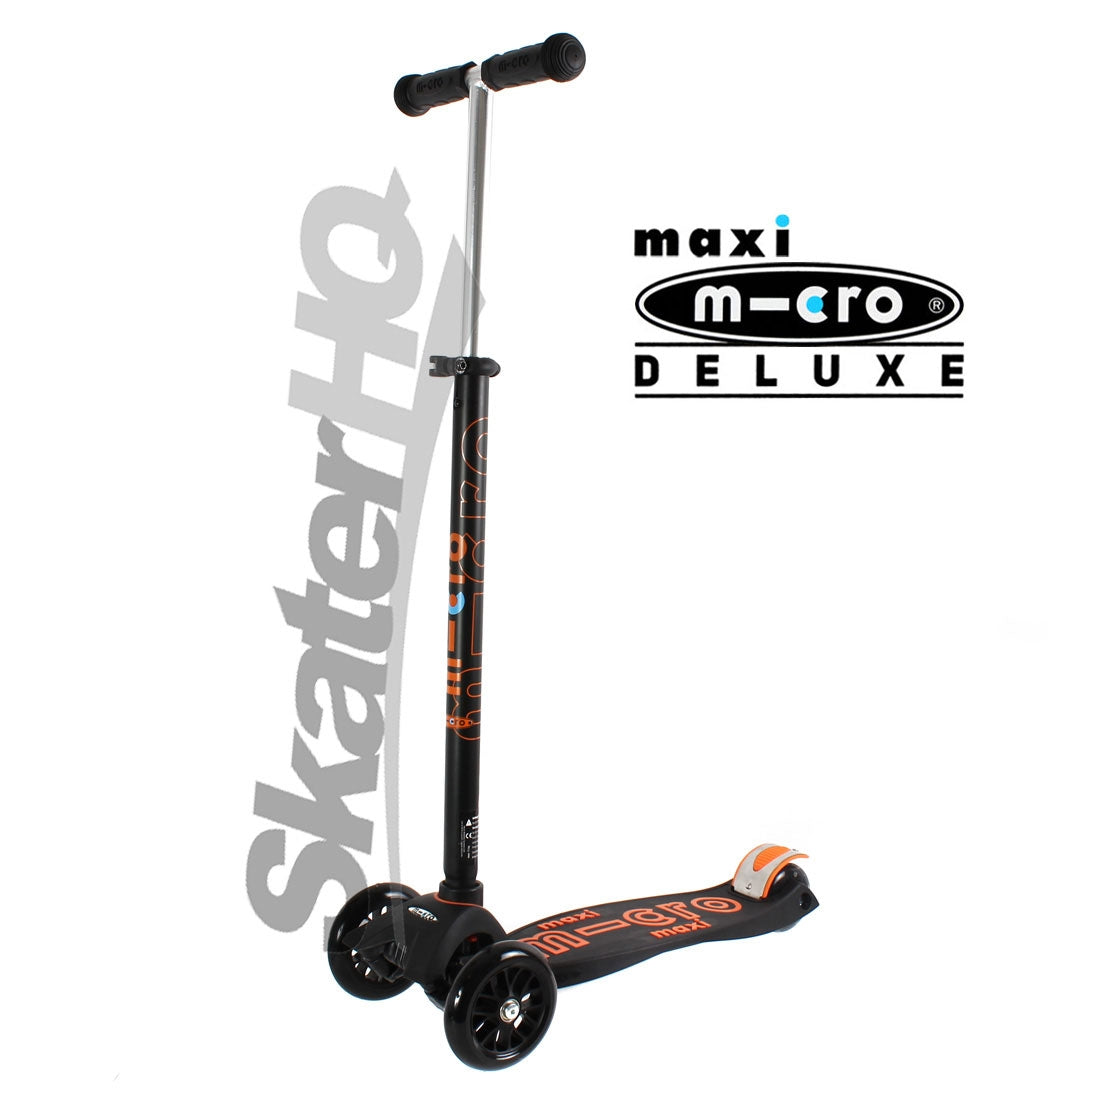 Micro Maxi Deluxe Scooter - Black Scooter Completes Rec